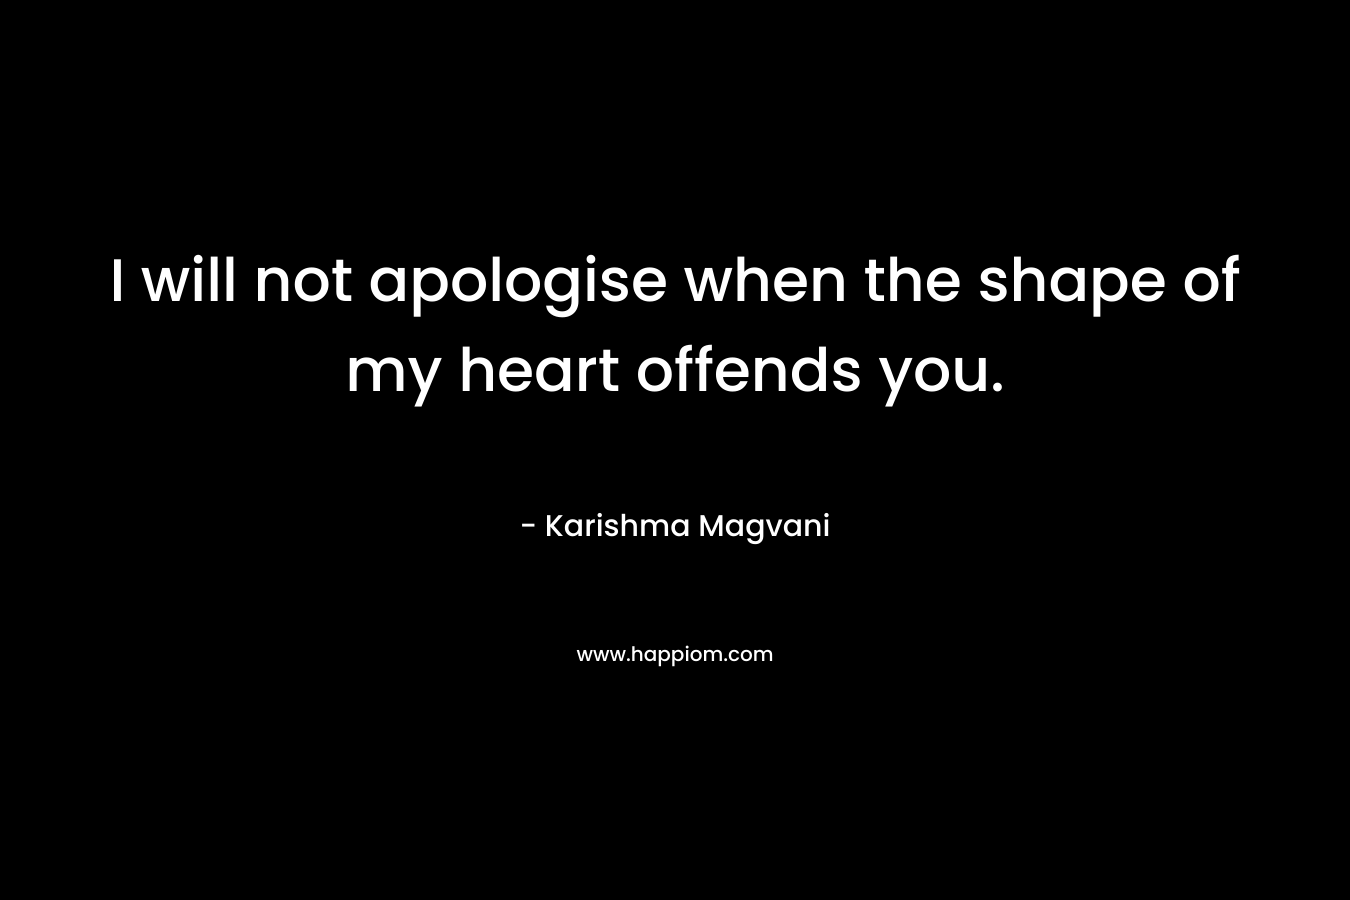 I will not apologise when the shape of my heart offends you.